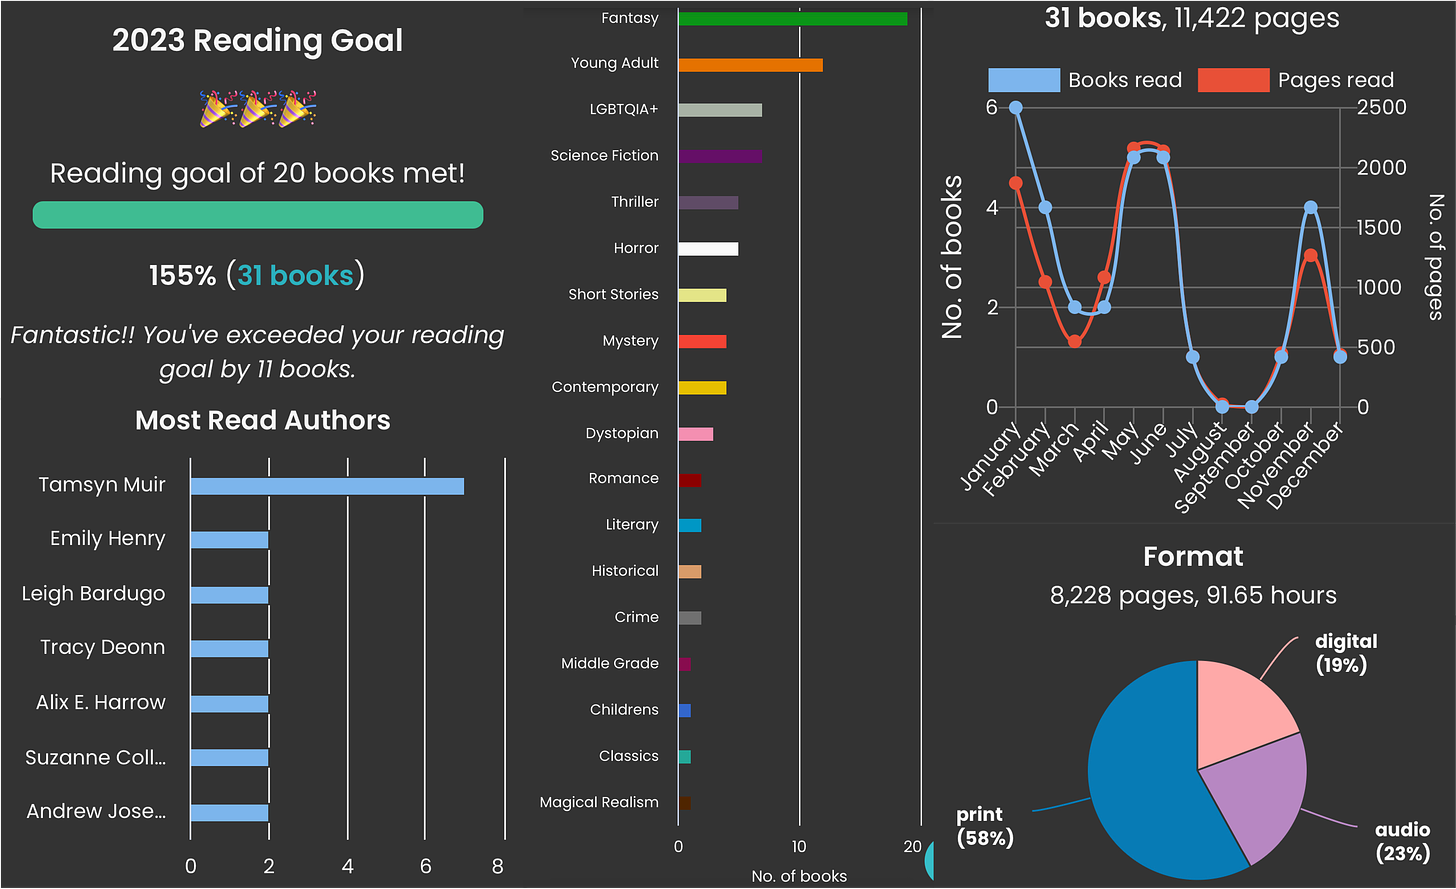 Storygraph stats for 2023: Reading goal of 20 books met (155%, 31 books), Most Read Authors: Tamsyn Muir (7), Emily Henry/Leigh Bardugo/Tracy Deonn/Alix E. Harrow/Suzanne Collins/Andrew Joseph White all 2; Genre breakdown with top five genres: Fantasy (19), YA (12), LGBTQIA+ (7), Sci fi (7), Thriller (5); Reading stats by month (31 books, 11422 pages) shows most books read in January, May, June, and November with none read in August and September; Format breakdown shows 58% print, 23% audio, and 19% digital